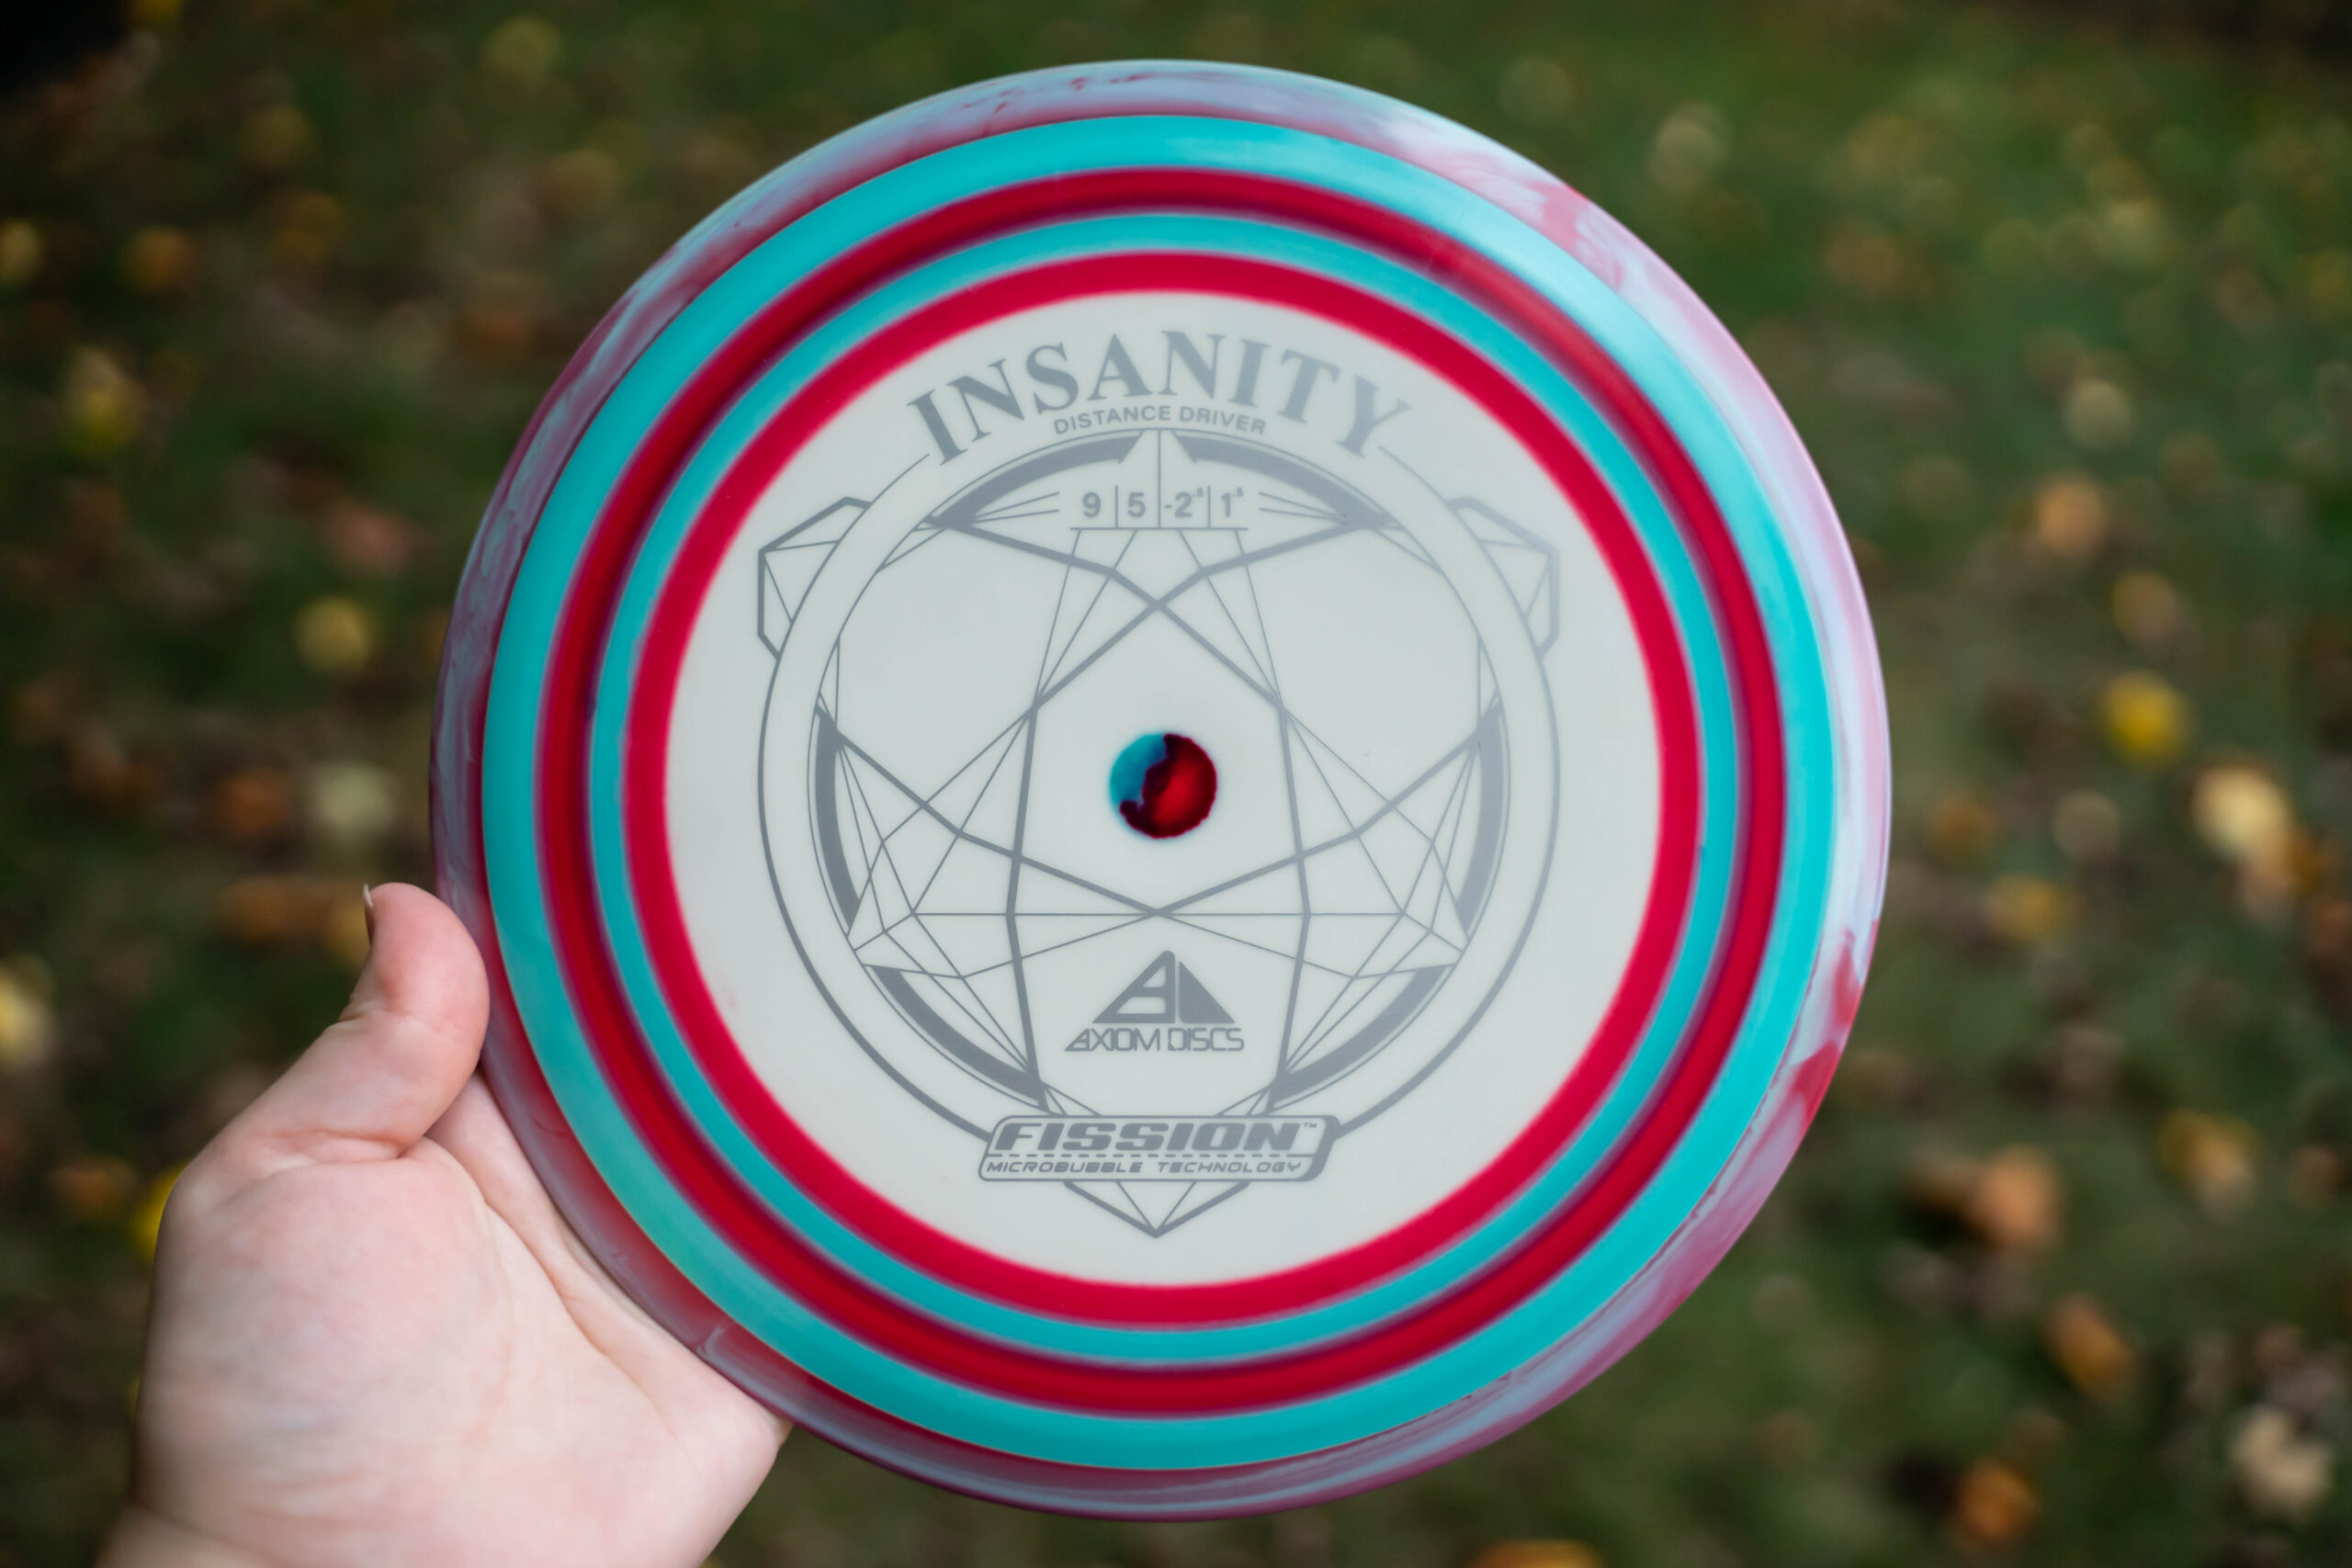 Axiom Fission Insanity – Red & Blue Spin Dye